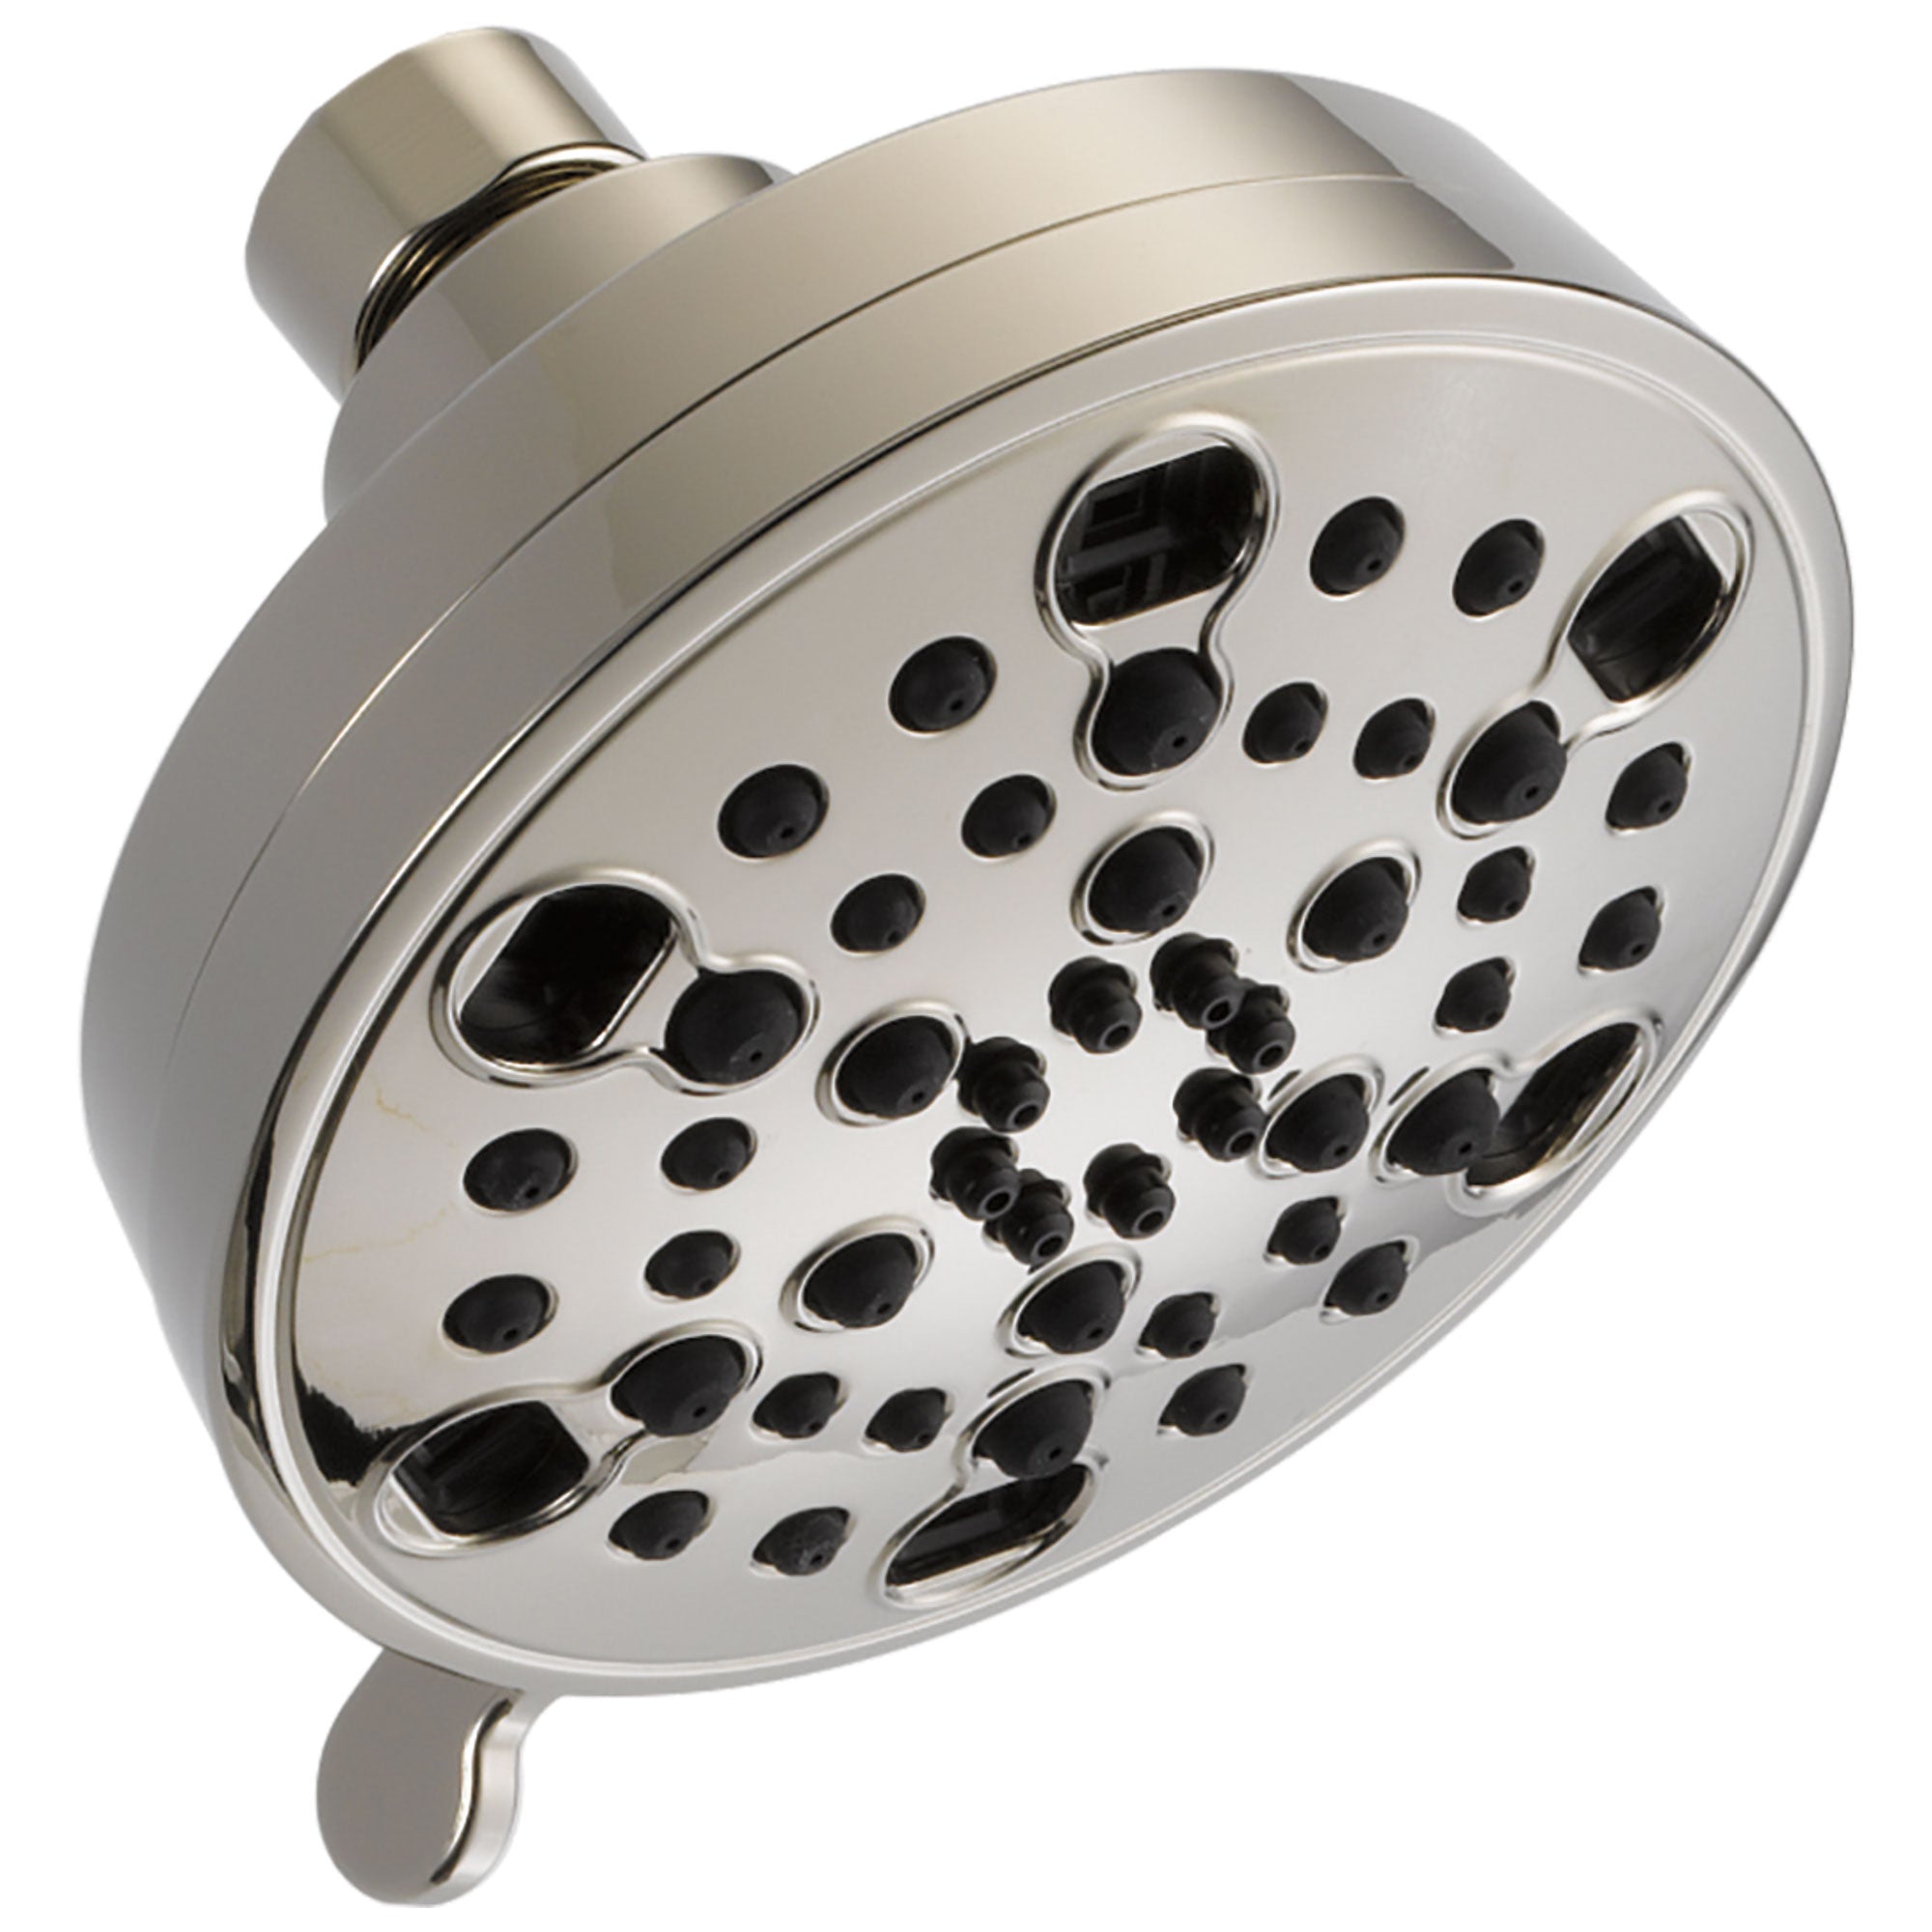 Delta Polished Nickel Finish H2Okinetic 5-Setting Contemporary Shower Head D52638PN18PK